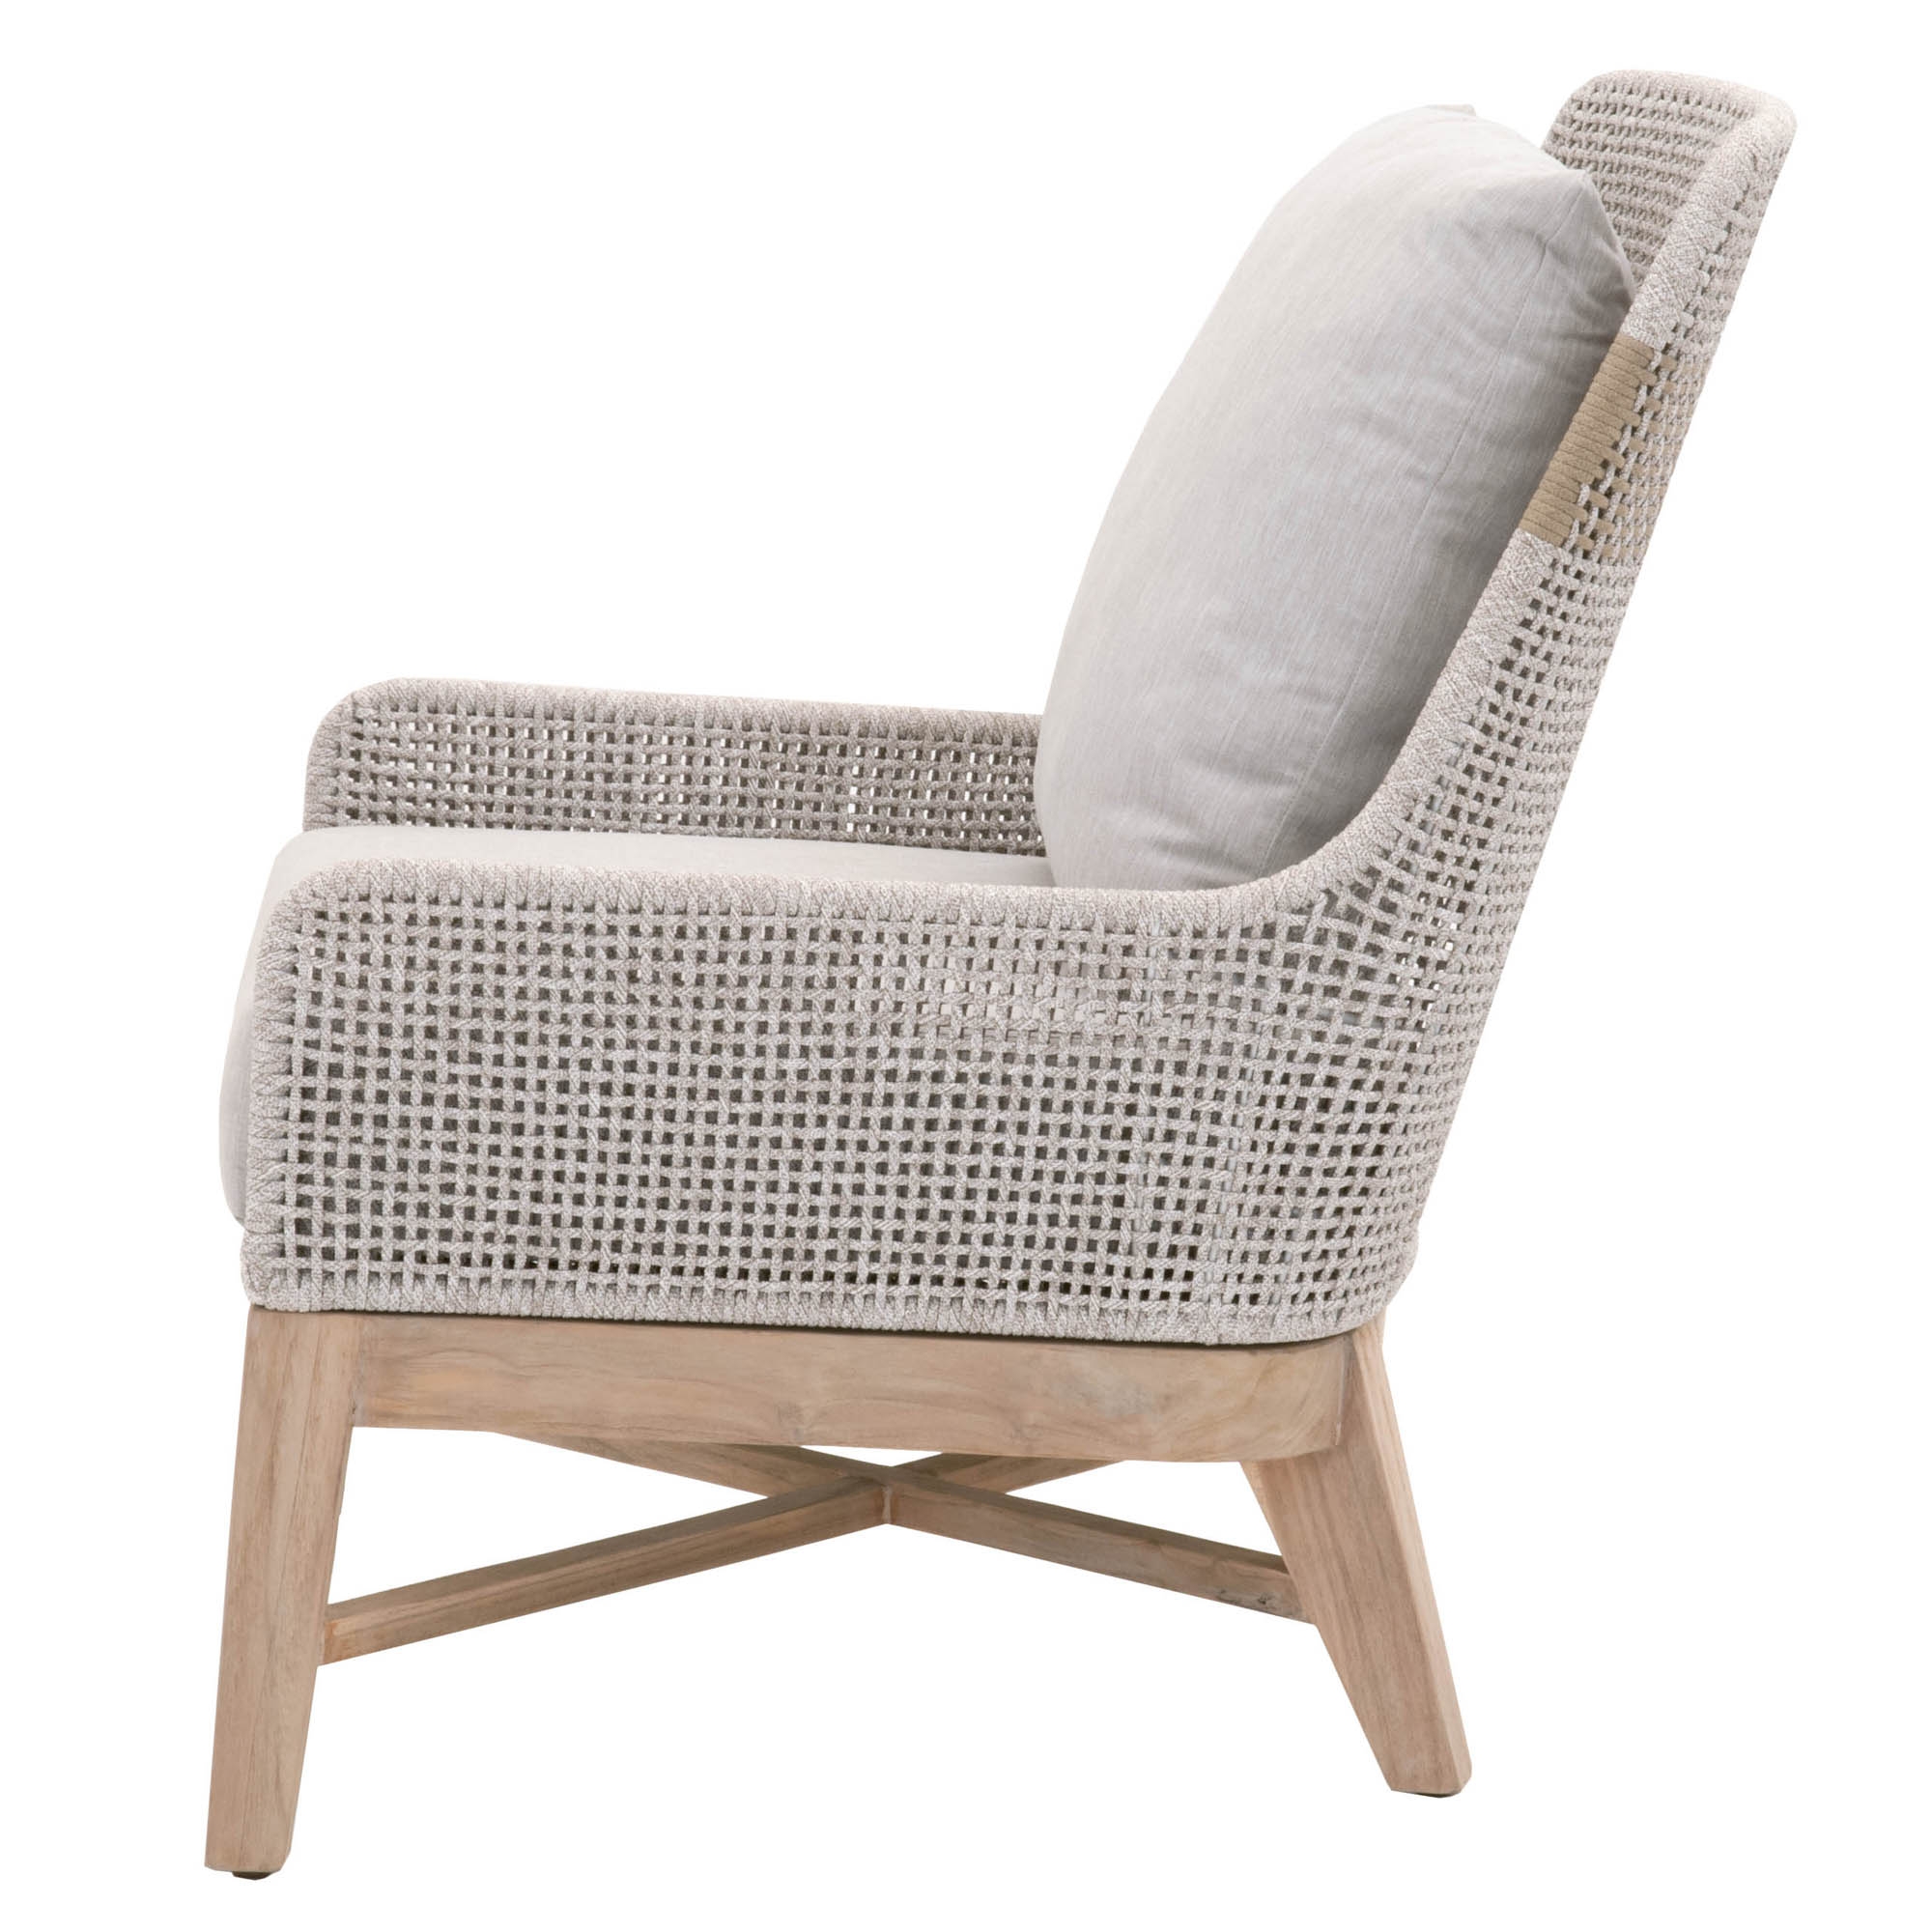 Tapestry Outdoor Club Chair, Taupe - Image 2